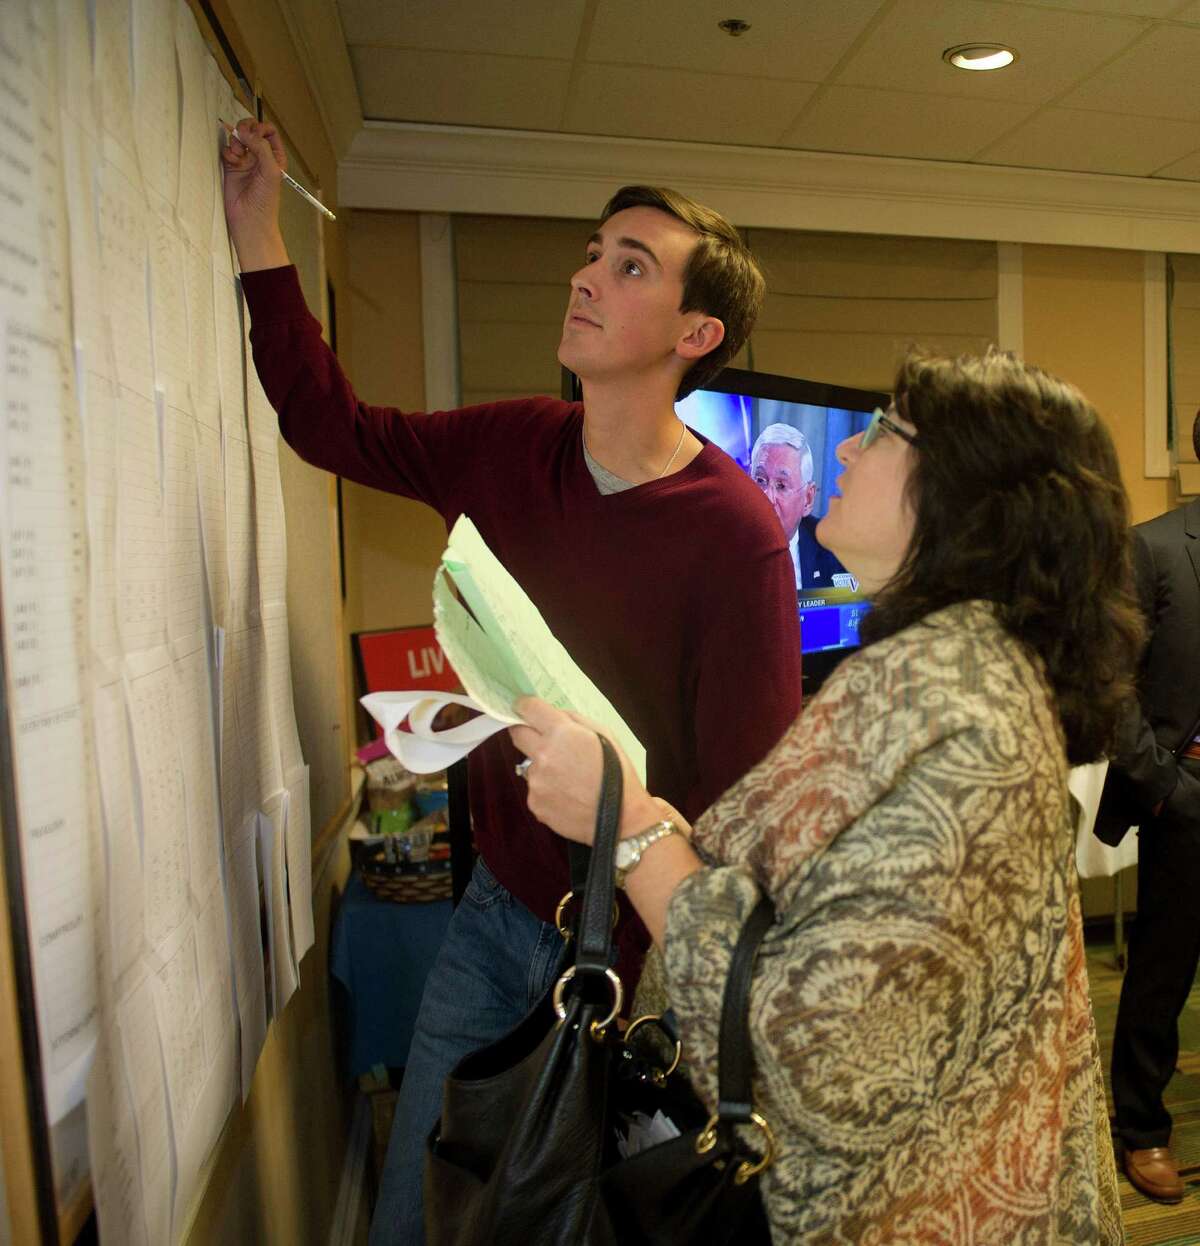 John Grosso puts up election results at the Hampton Inn in Stamford, Conn., on Tuesday, November 4, 2014.